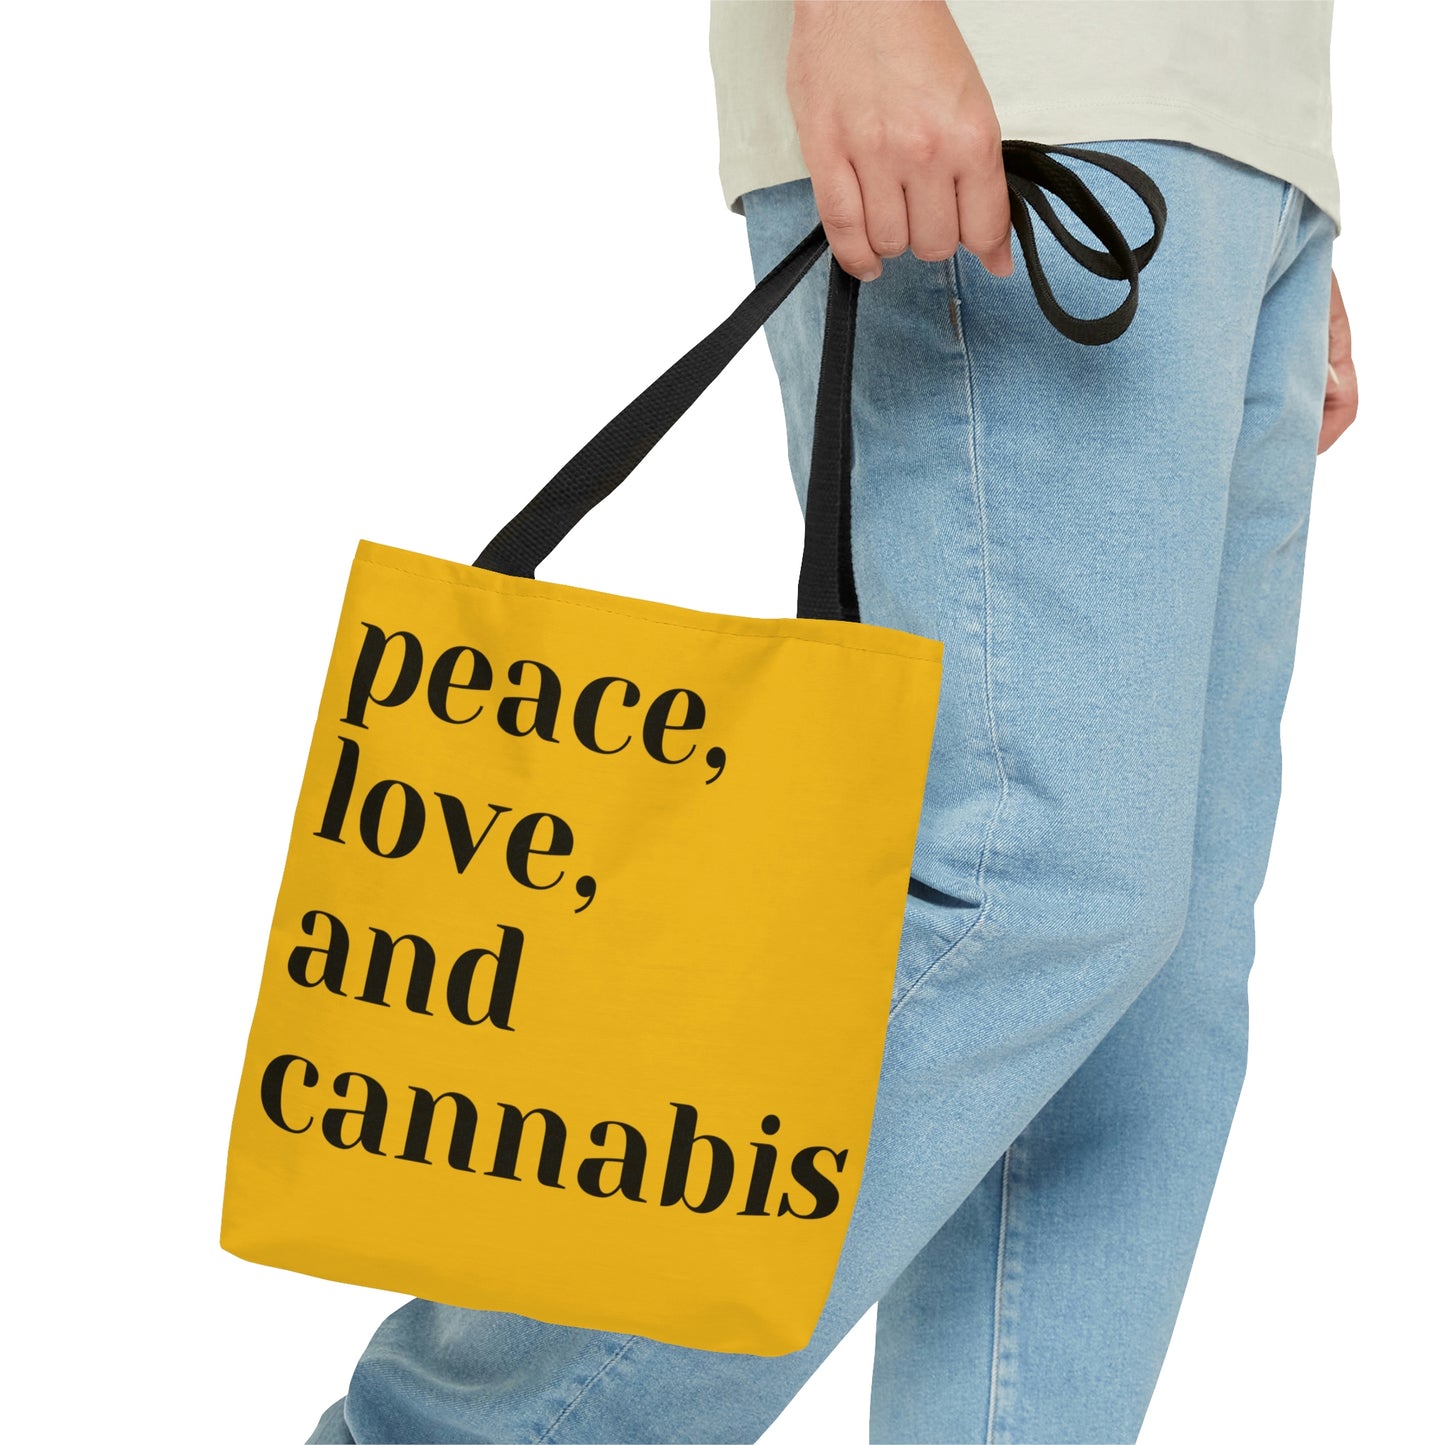 A man is constantly walking forward while he is carrying the Peace, Love and Cannabis Yellow Tote Bag